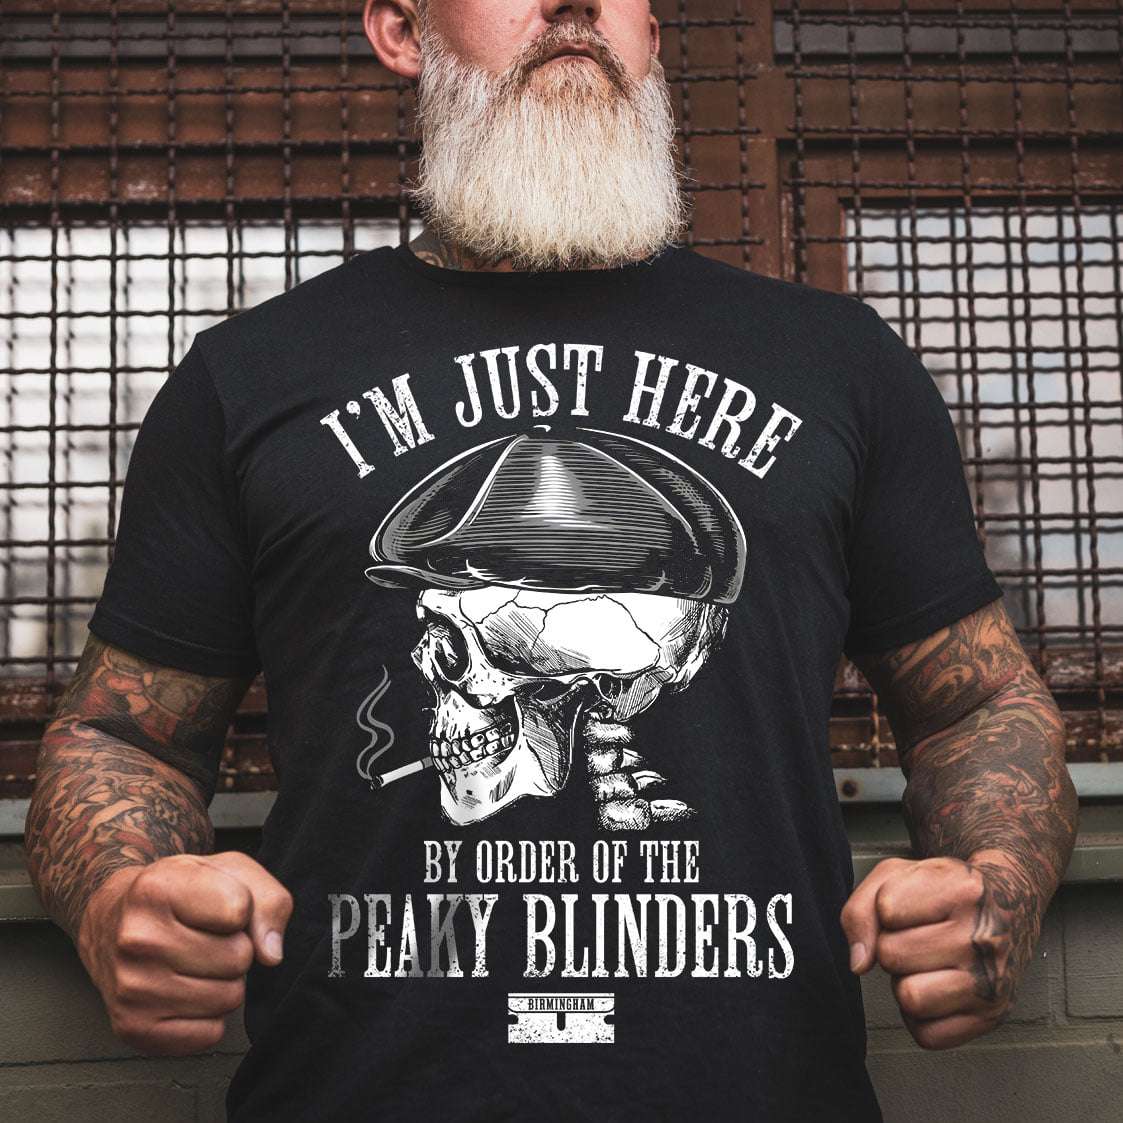 Old Skull - I;m Just here by order of the peaky blinders